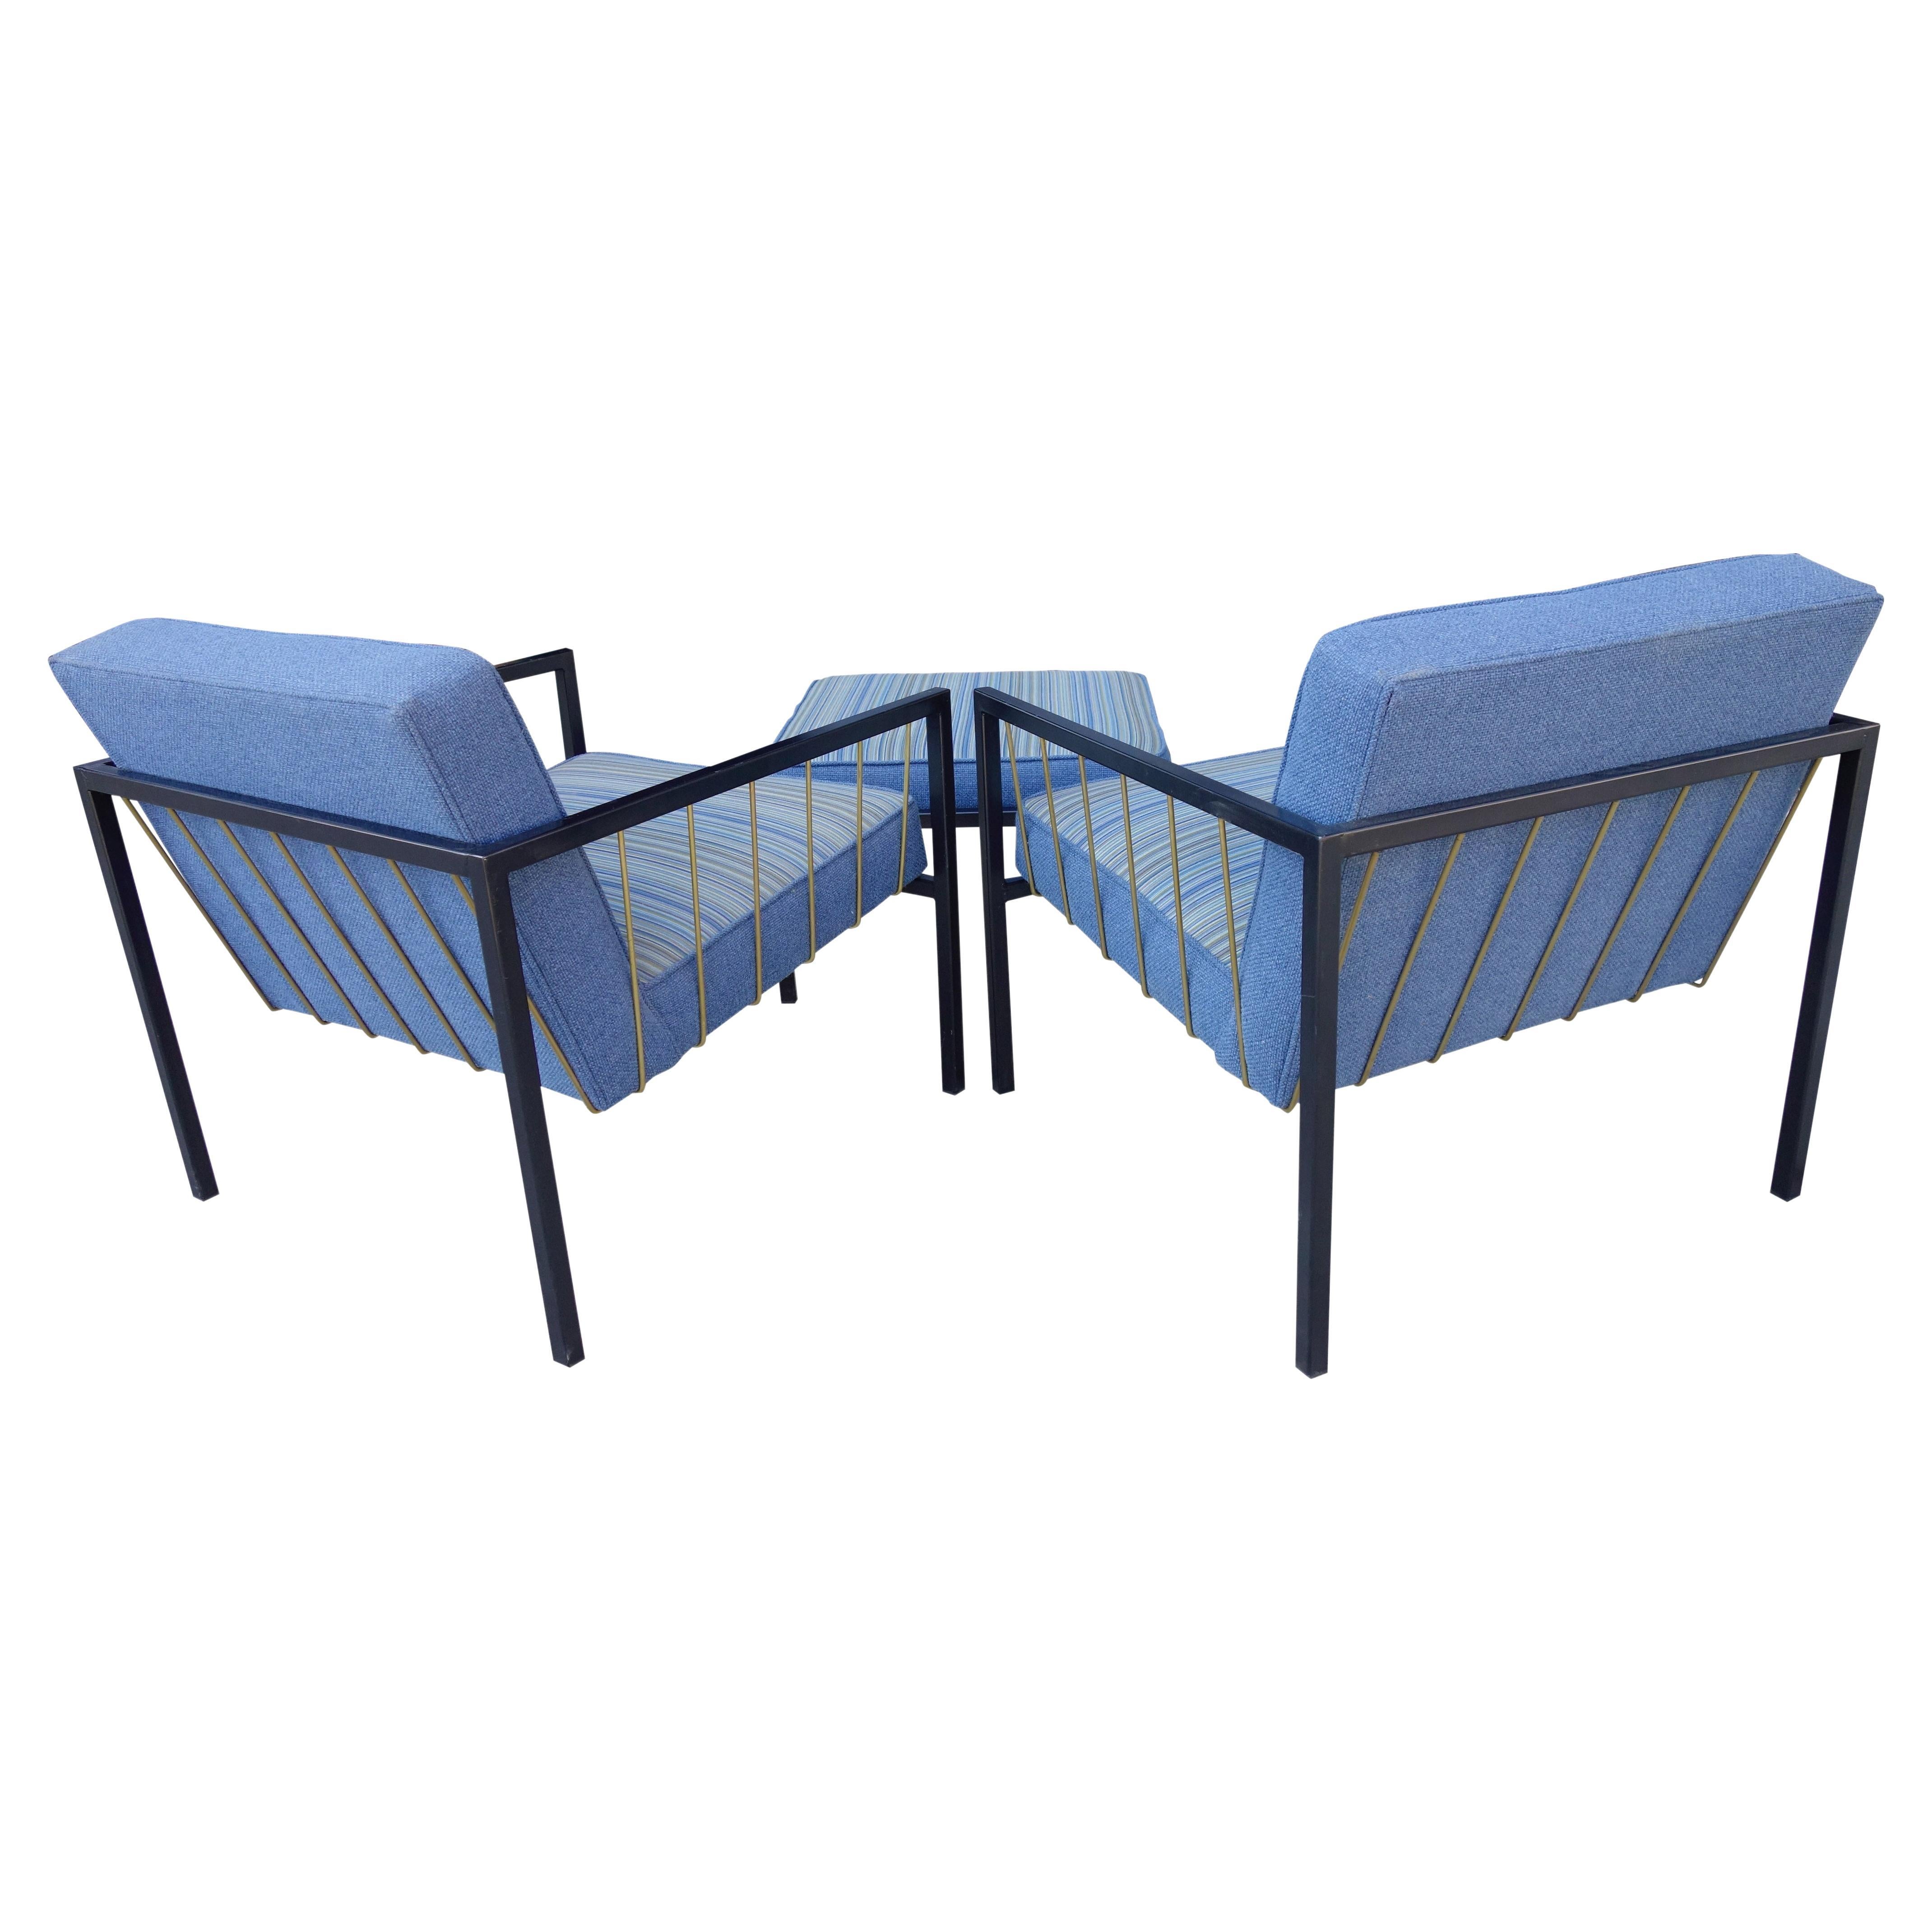 For your consideration are these wonderful and rare set of lounge chairs and ottoman by Donald Knorr for Vista of California. Featuring a metal frame and original upholstered cushions secured by a fabulous network of solid brass elements. Knorr also